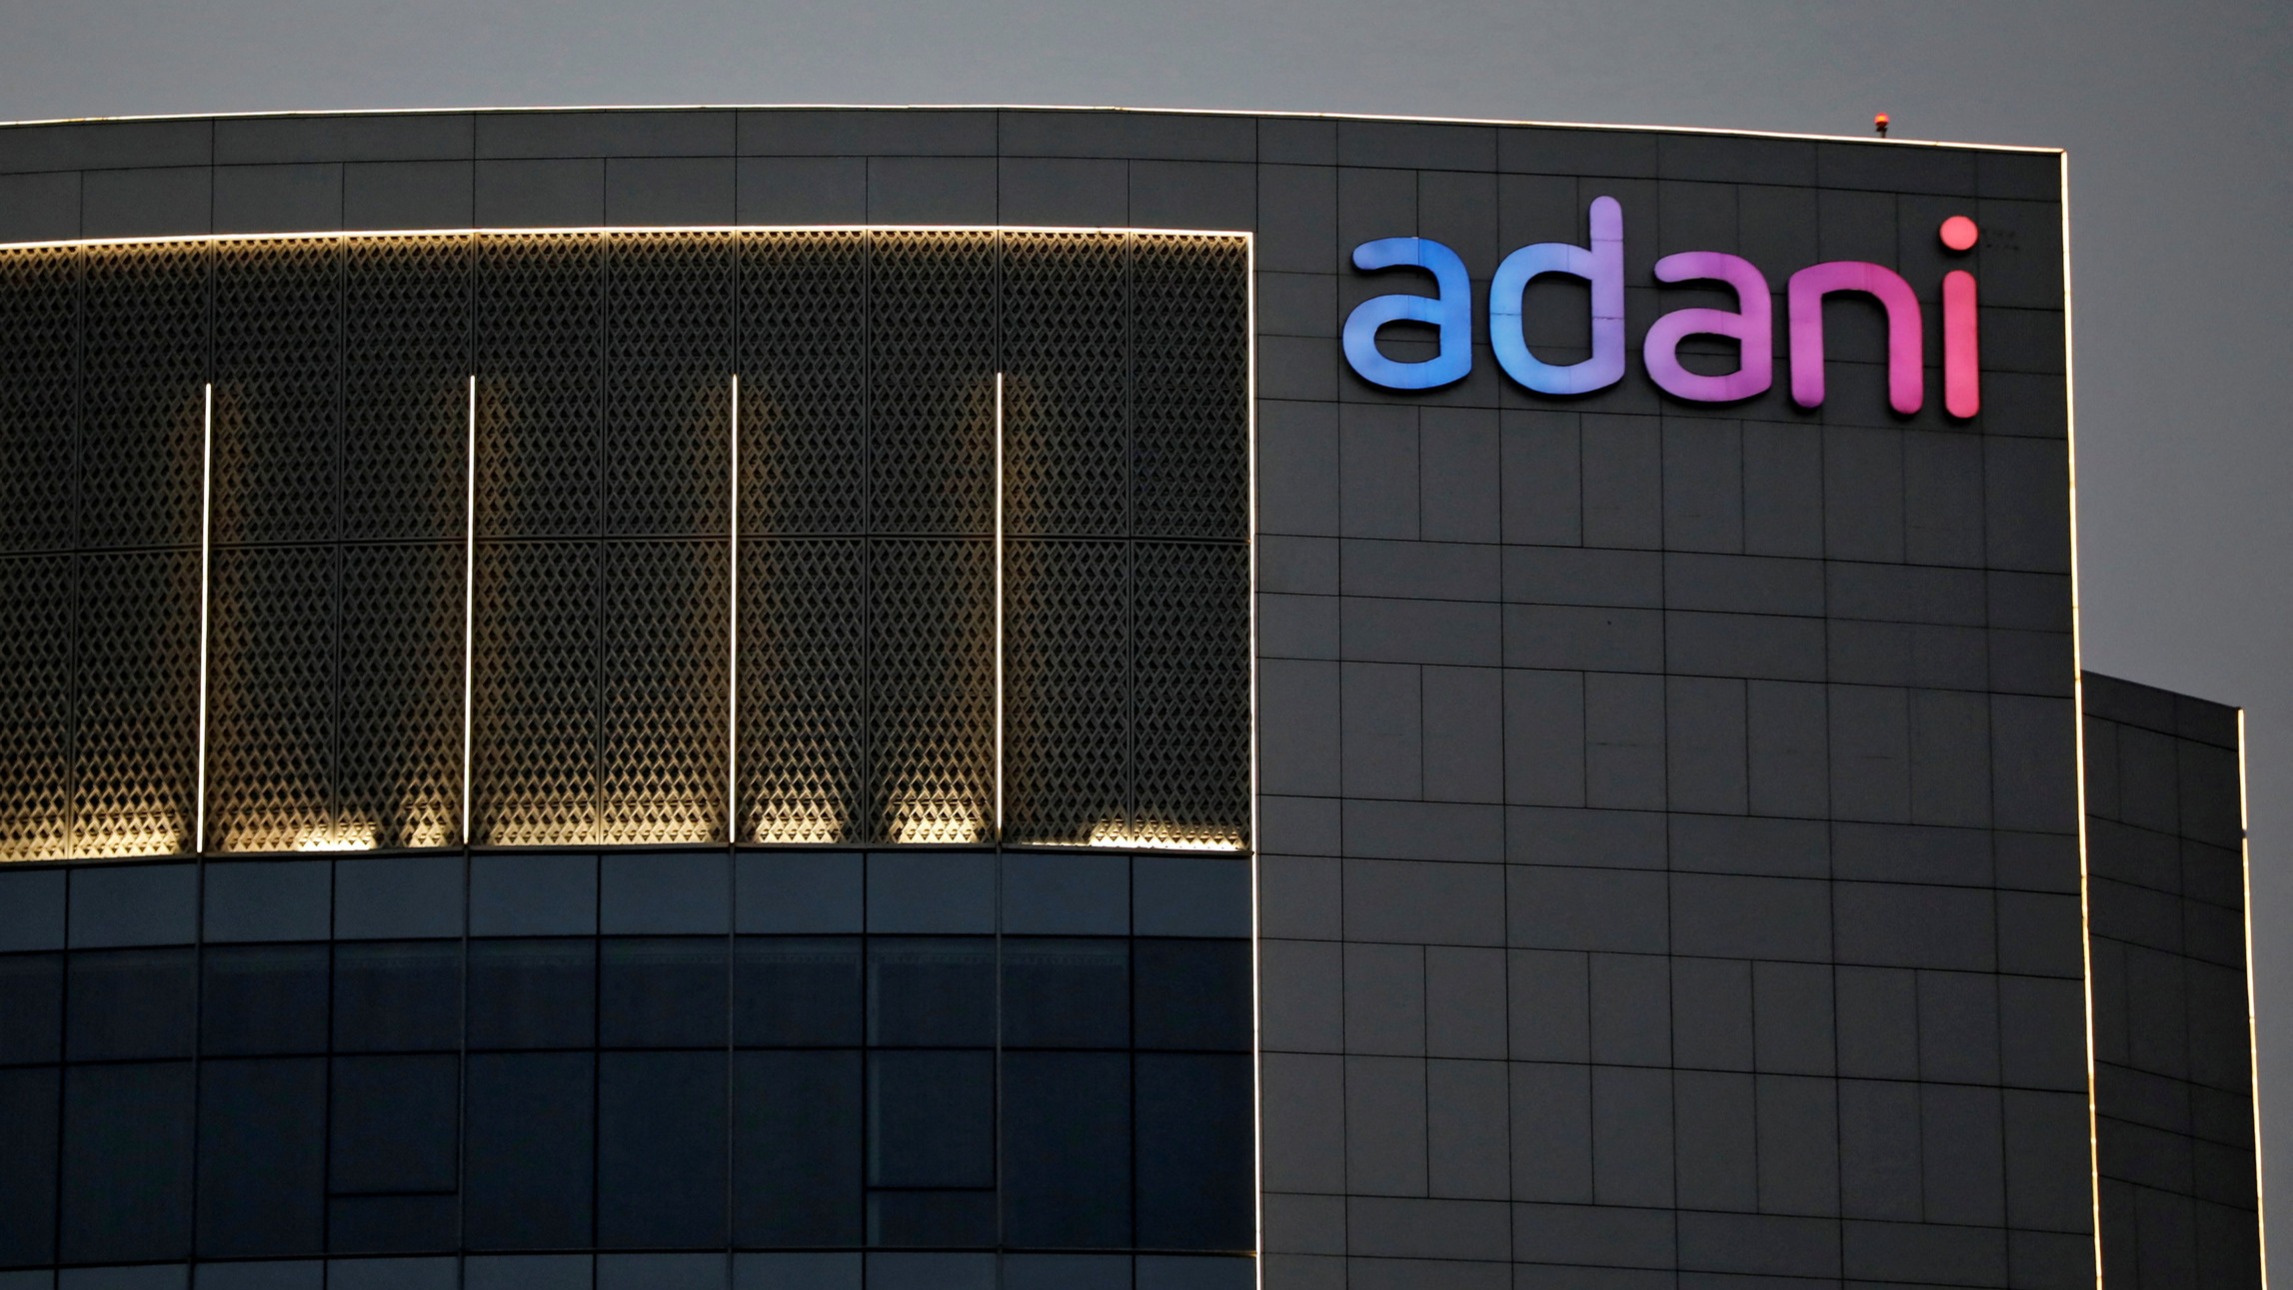 ft.com - Hudson Lockett - Adani stocks shed $29bn as group launches share sale